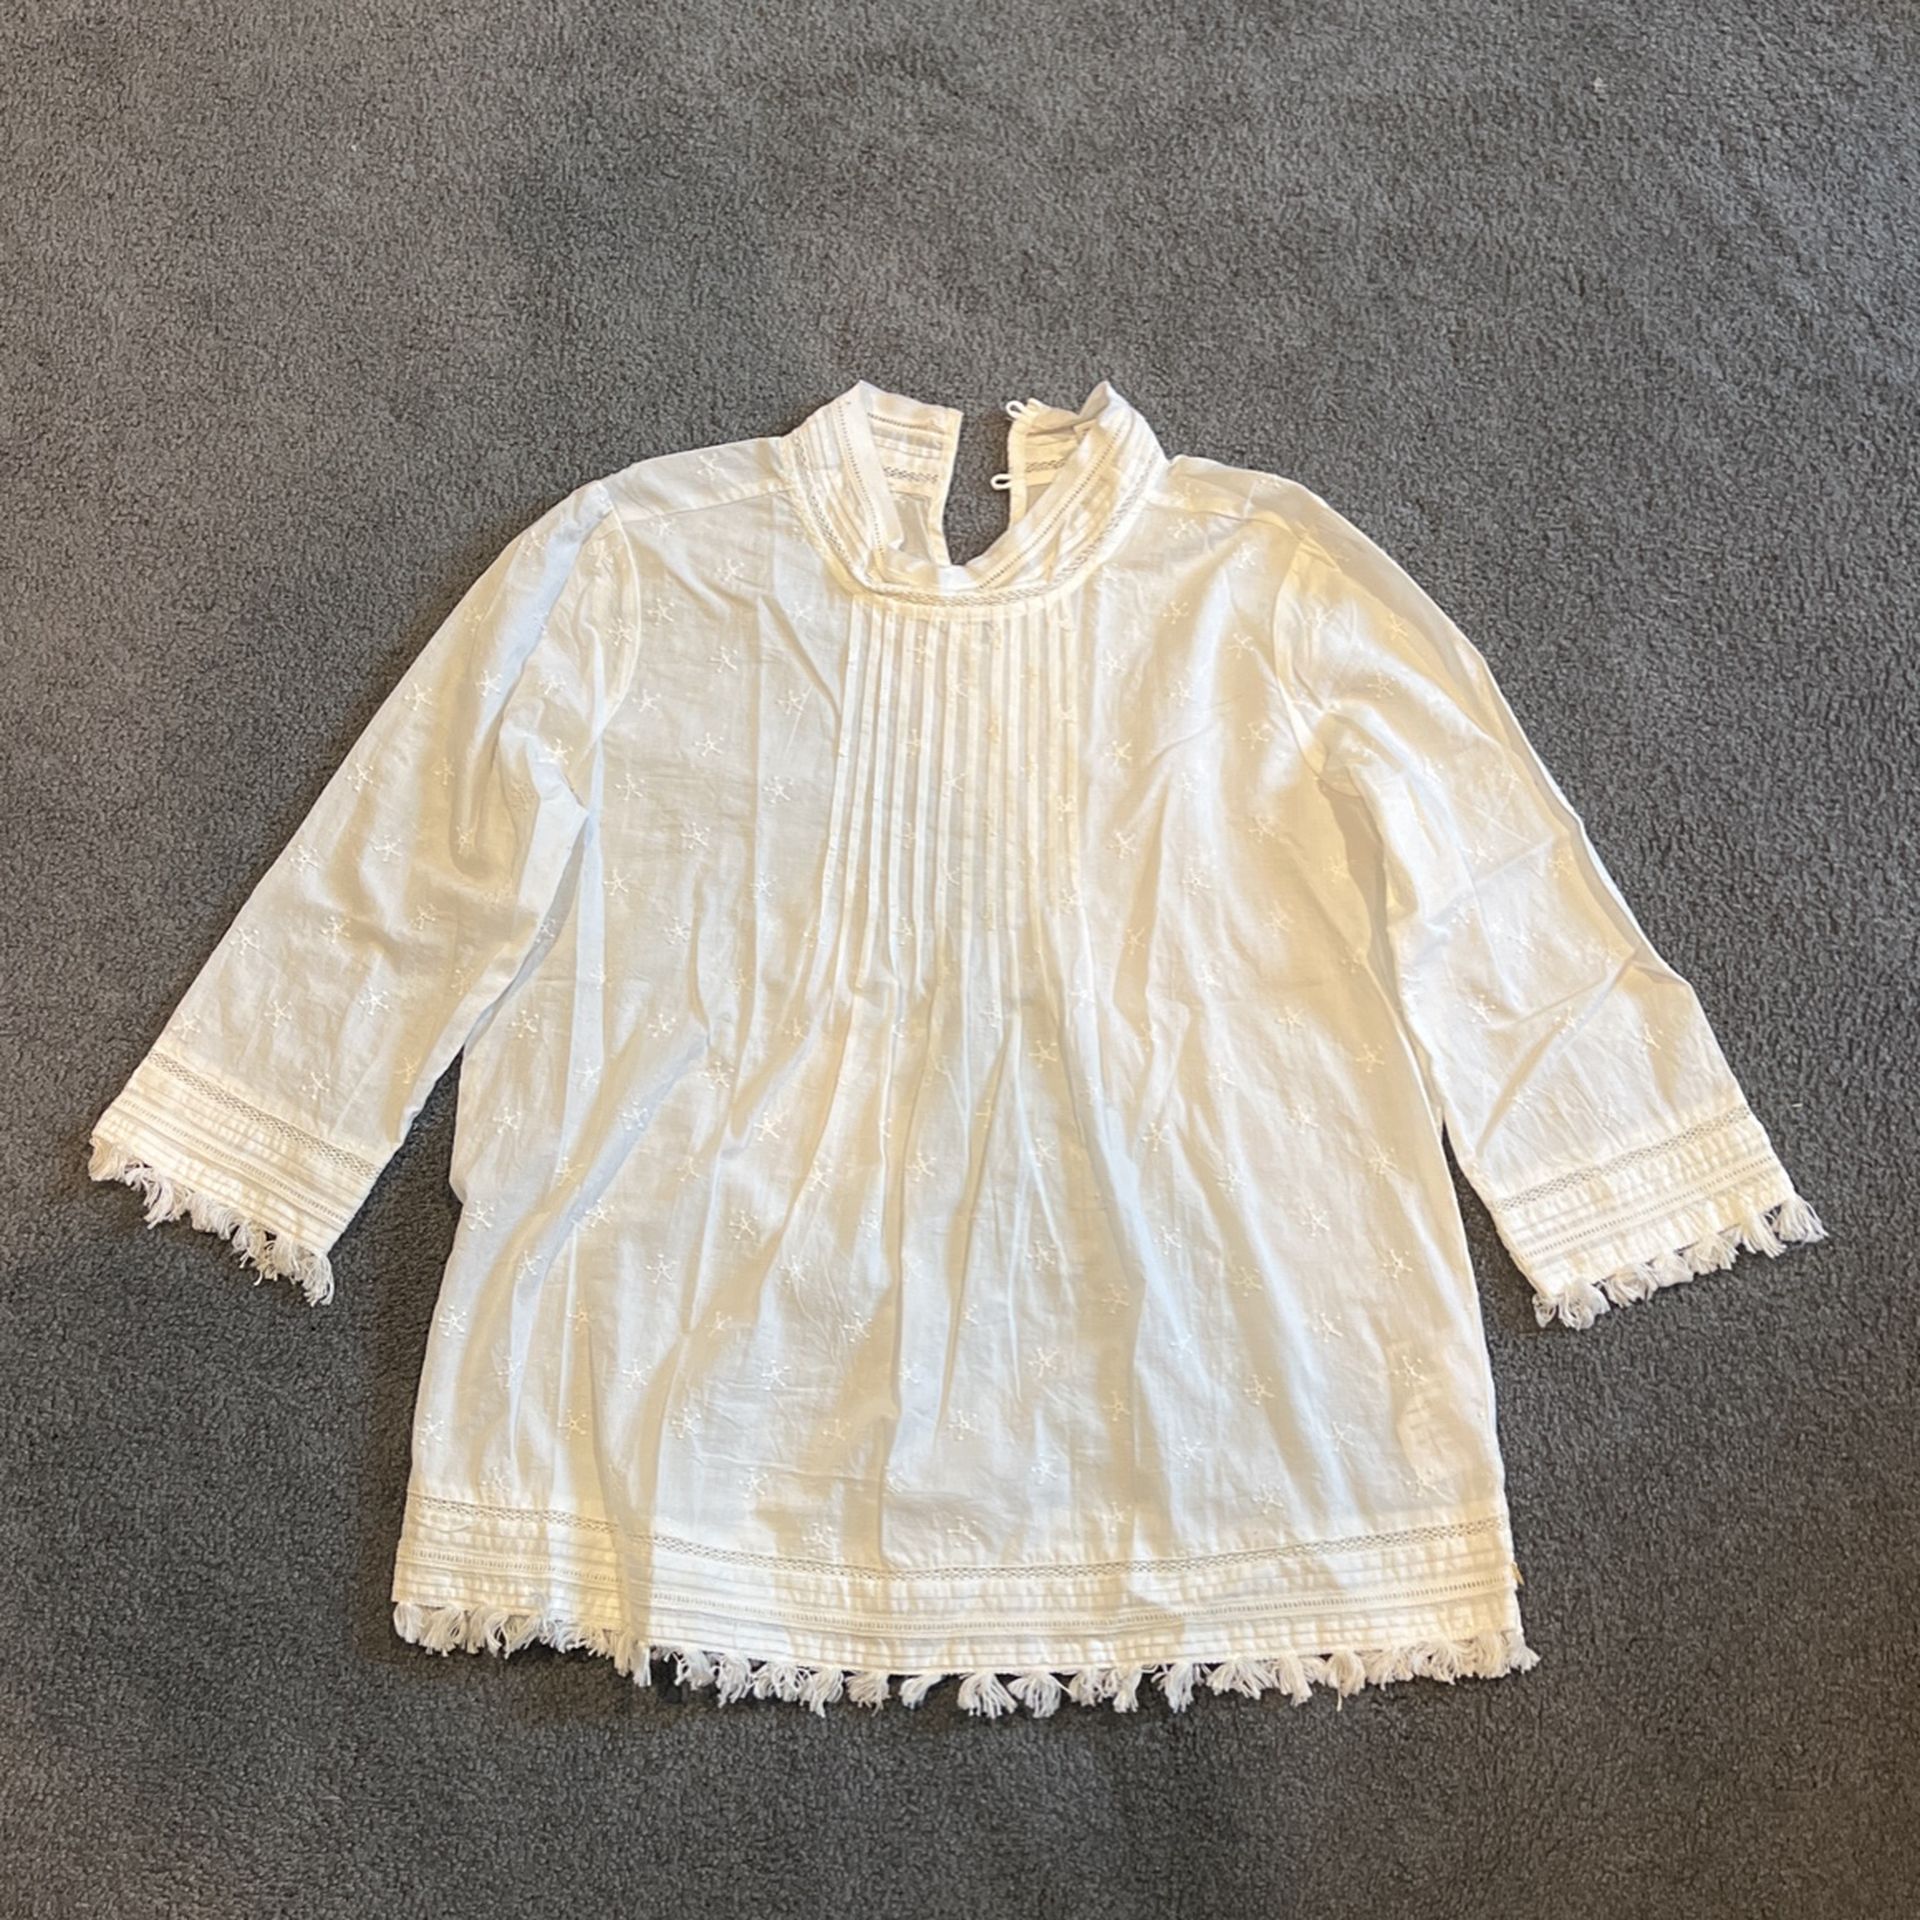 Anthropology Scotch And Soda Cream Blouse